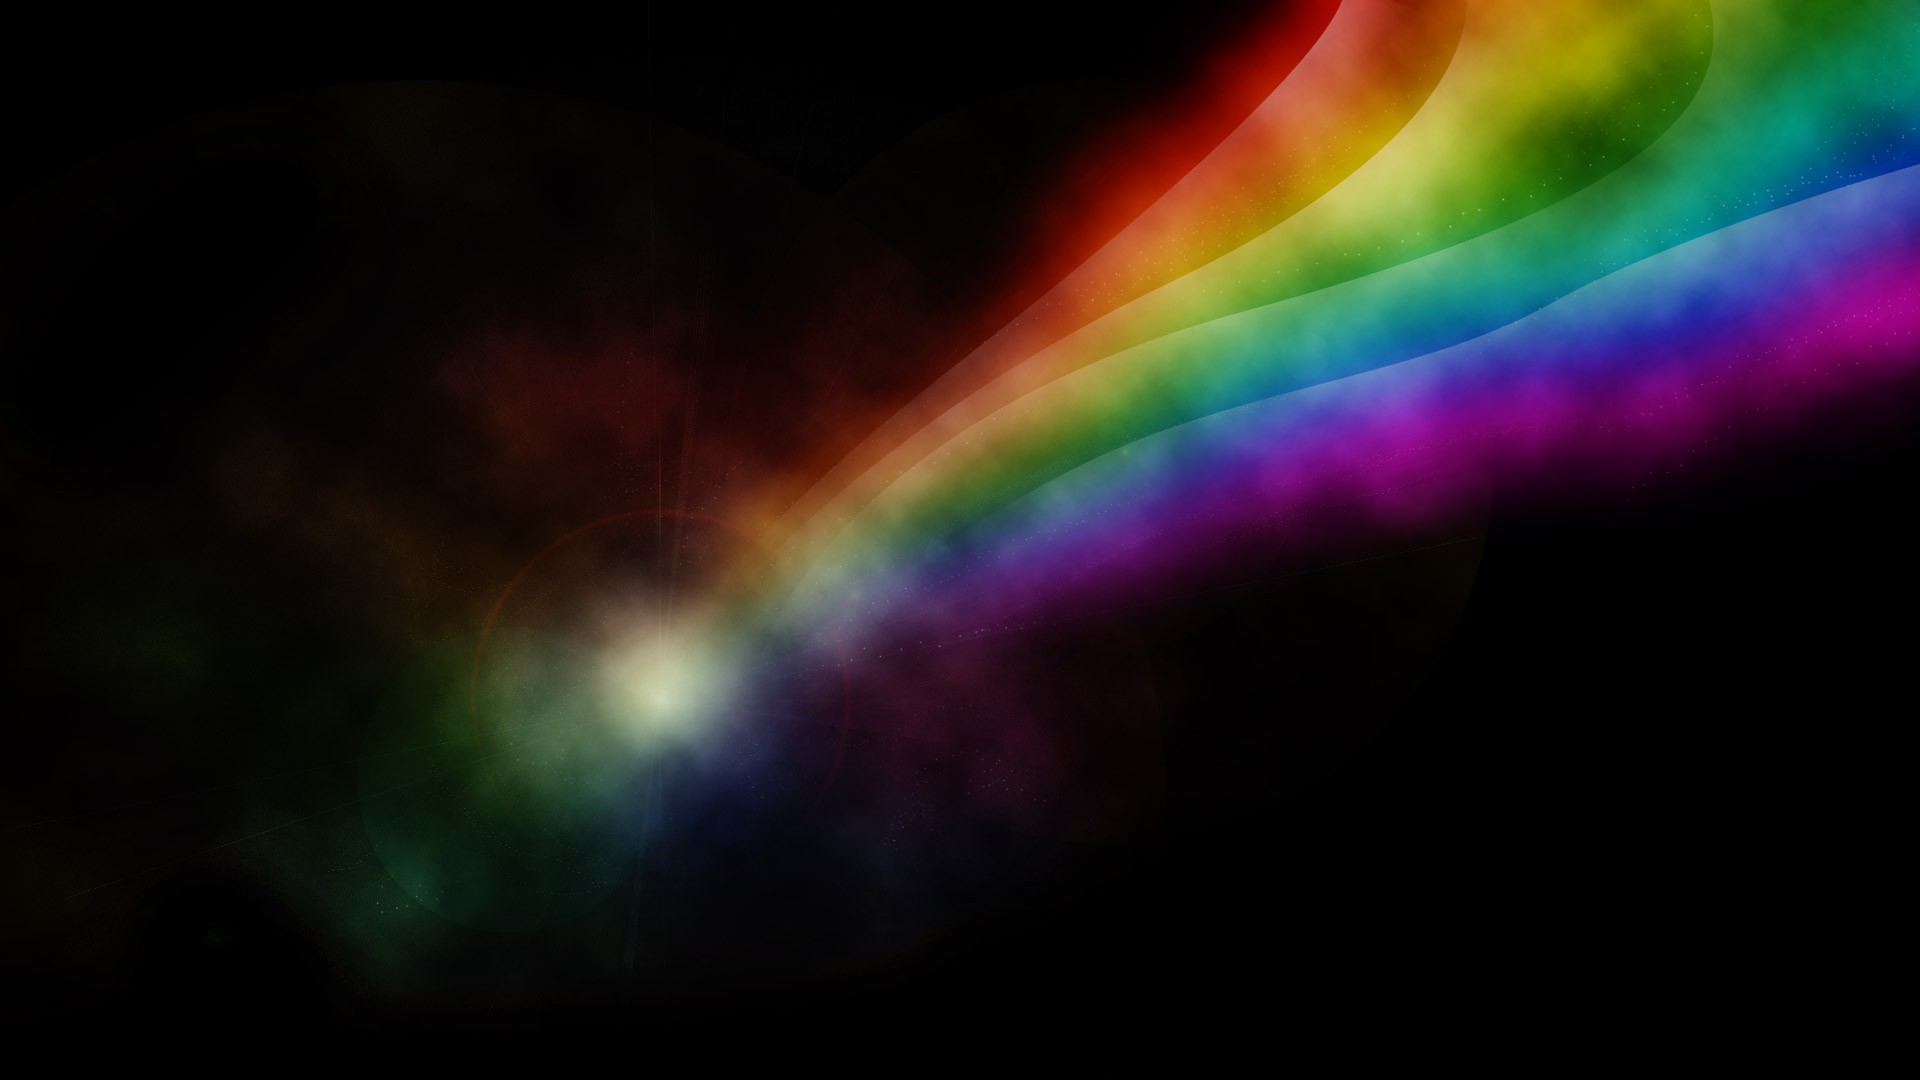 Wallpaper Rainbow with resolution 1920X1080 pixel. You can use this wallpaper as background for your desktop Computer Screensavers, Android or iPhone smartphones